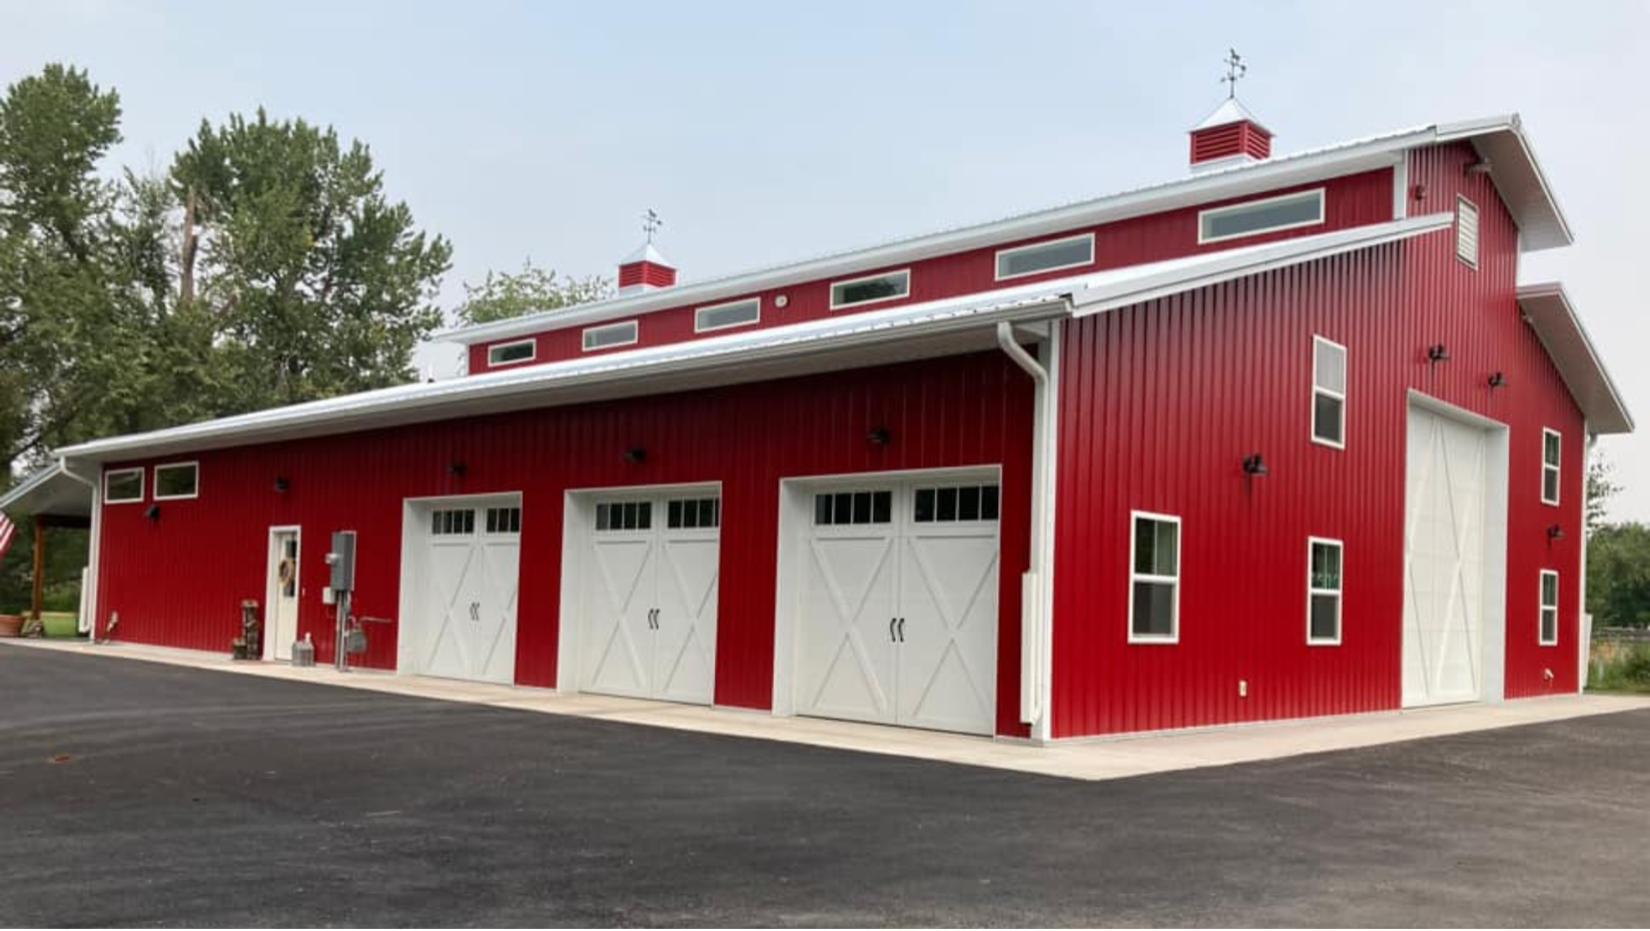 14 Tips to Make Steel Buildings in Montana Safe for Animals